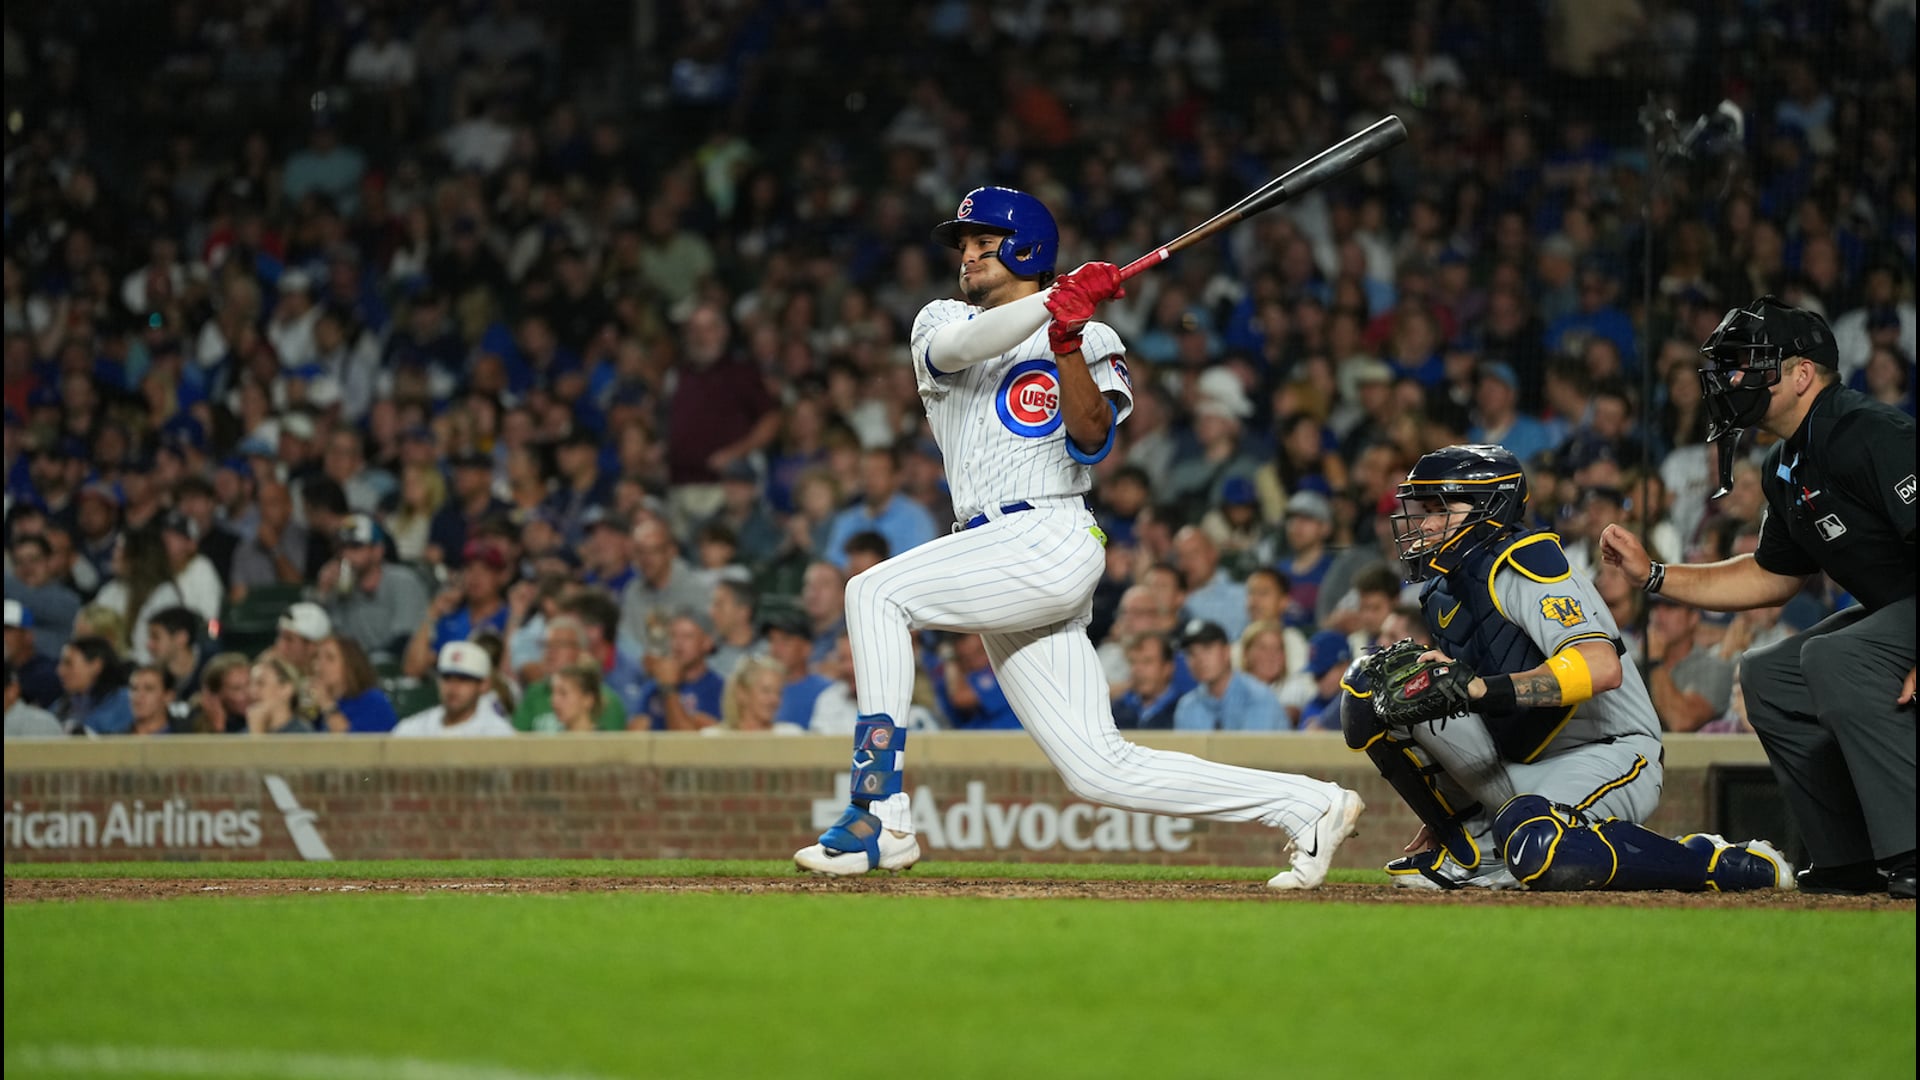 Cubs Spring Training Notebook: Swanson's winning mentality, Lester's mark  on Steele, Cubs make some spring history - Marquee Sports Network